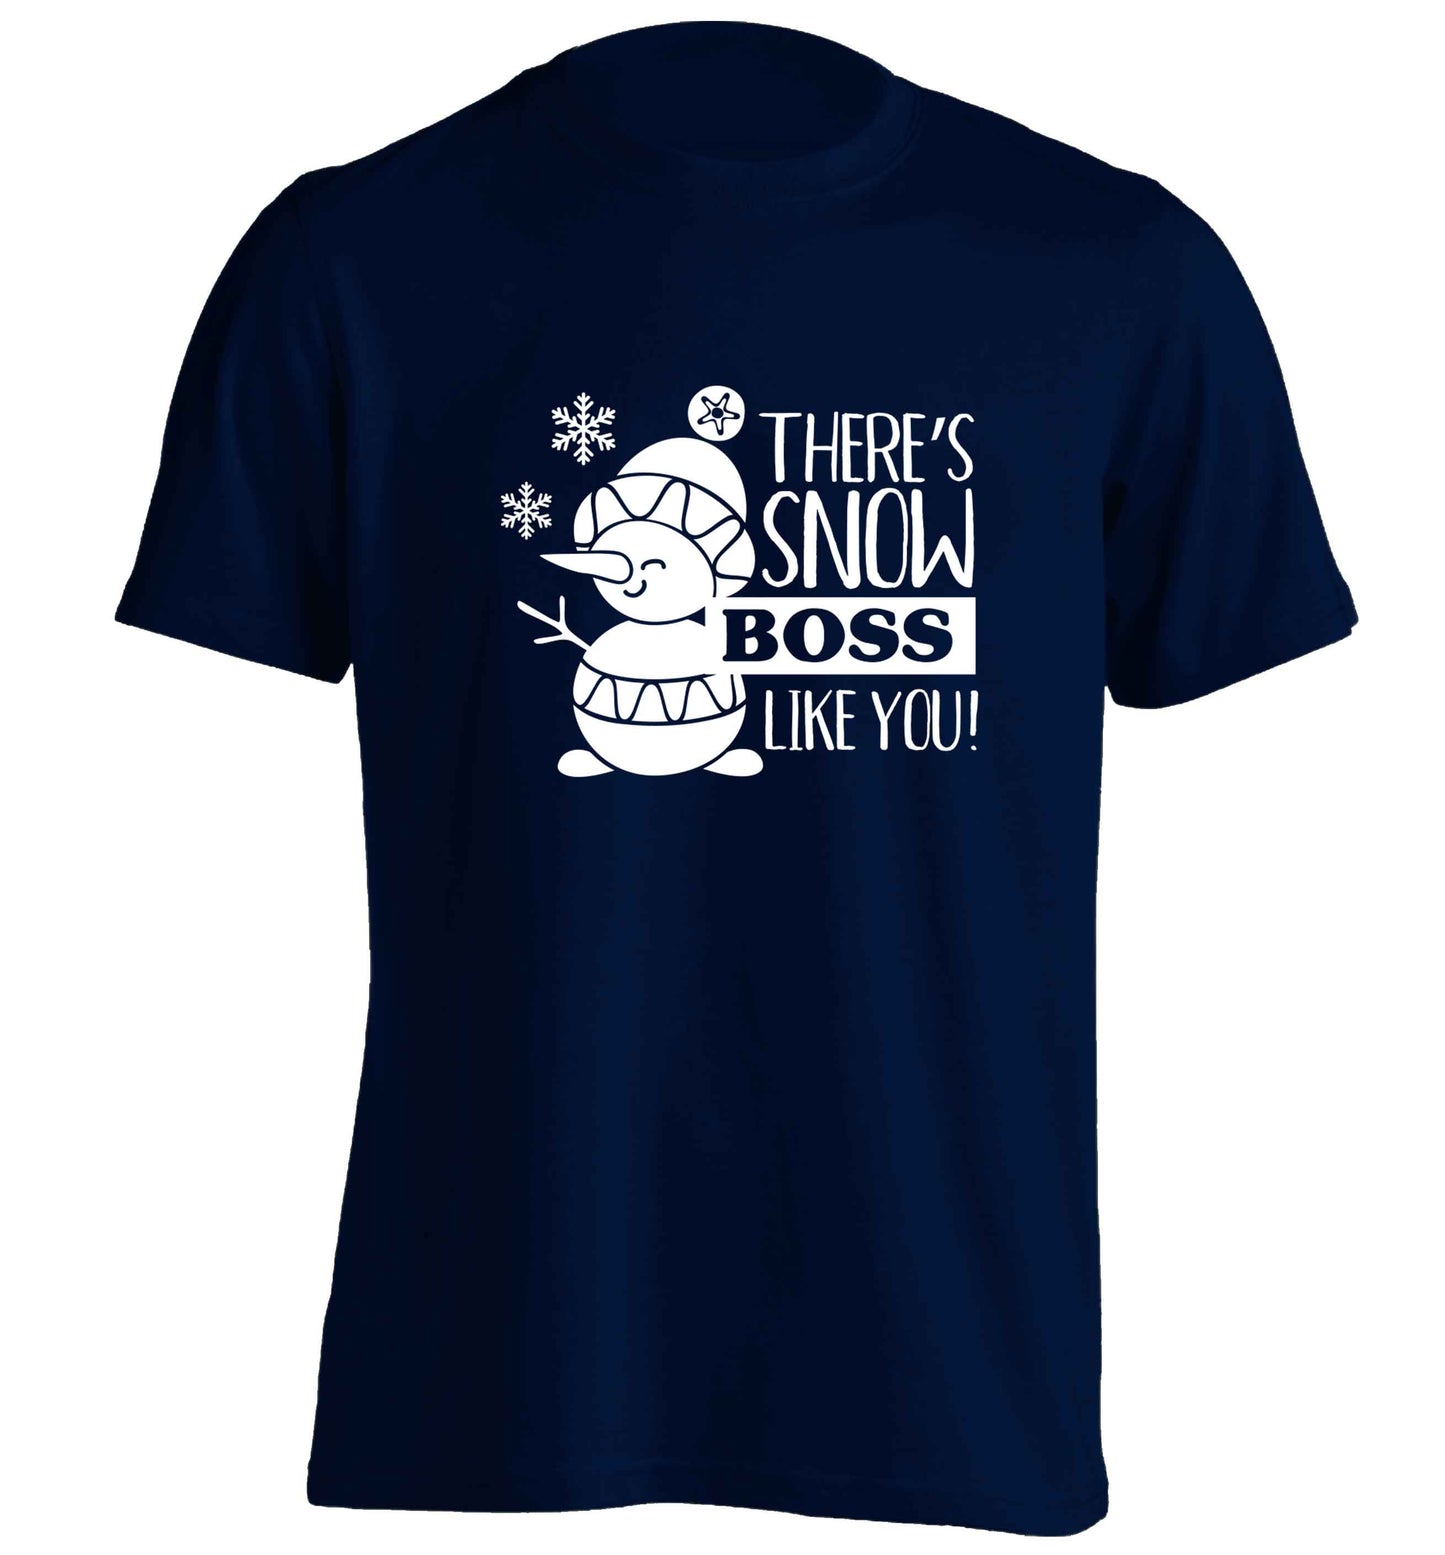 There's snow boss like you adults unisex navy Tshirt 2XL